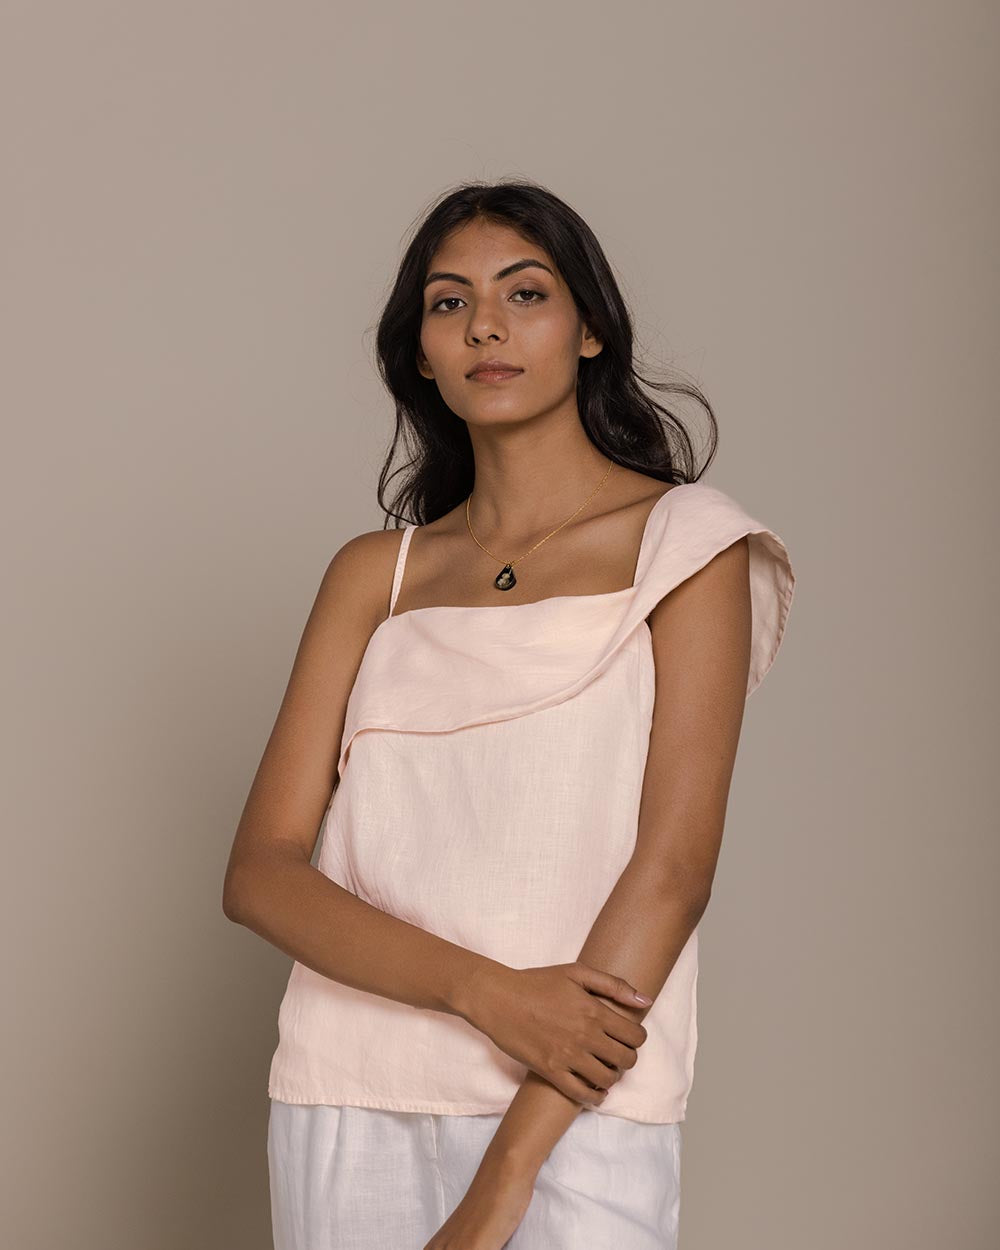 The Wandering Wave Top - Ice Pink at Kamakhyaa by Reistor. This item is Casual Wear, Hemp, Natural, Office Wear, Pink, Solids, T-Shirts, Tops, Womenswear